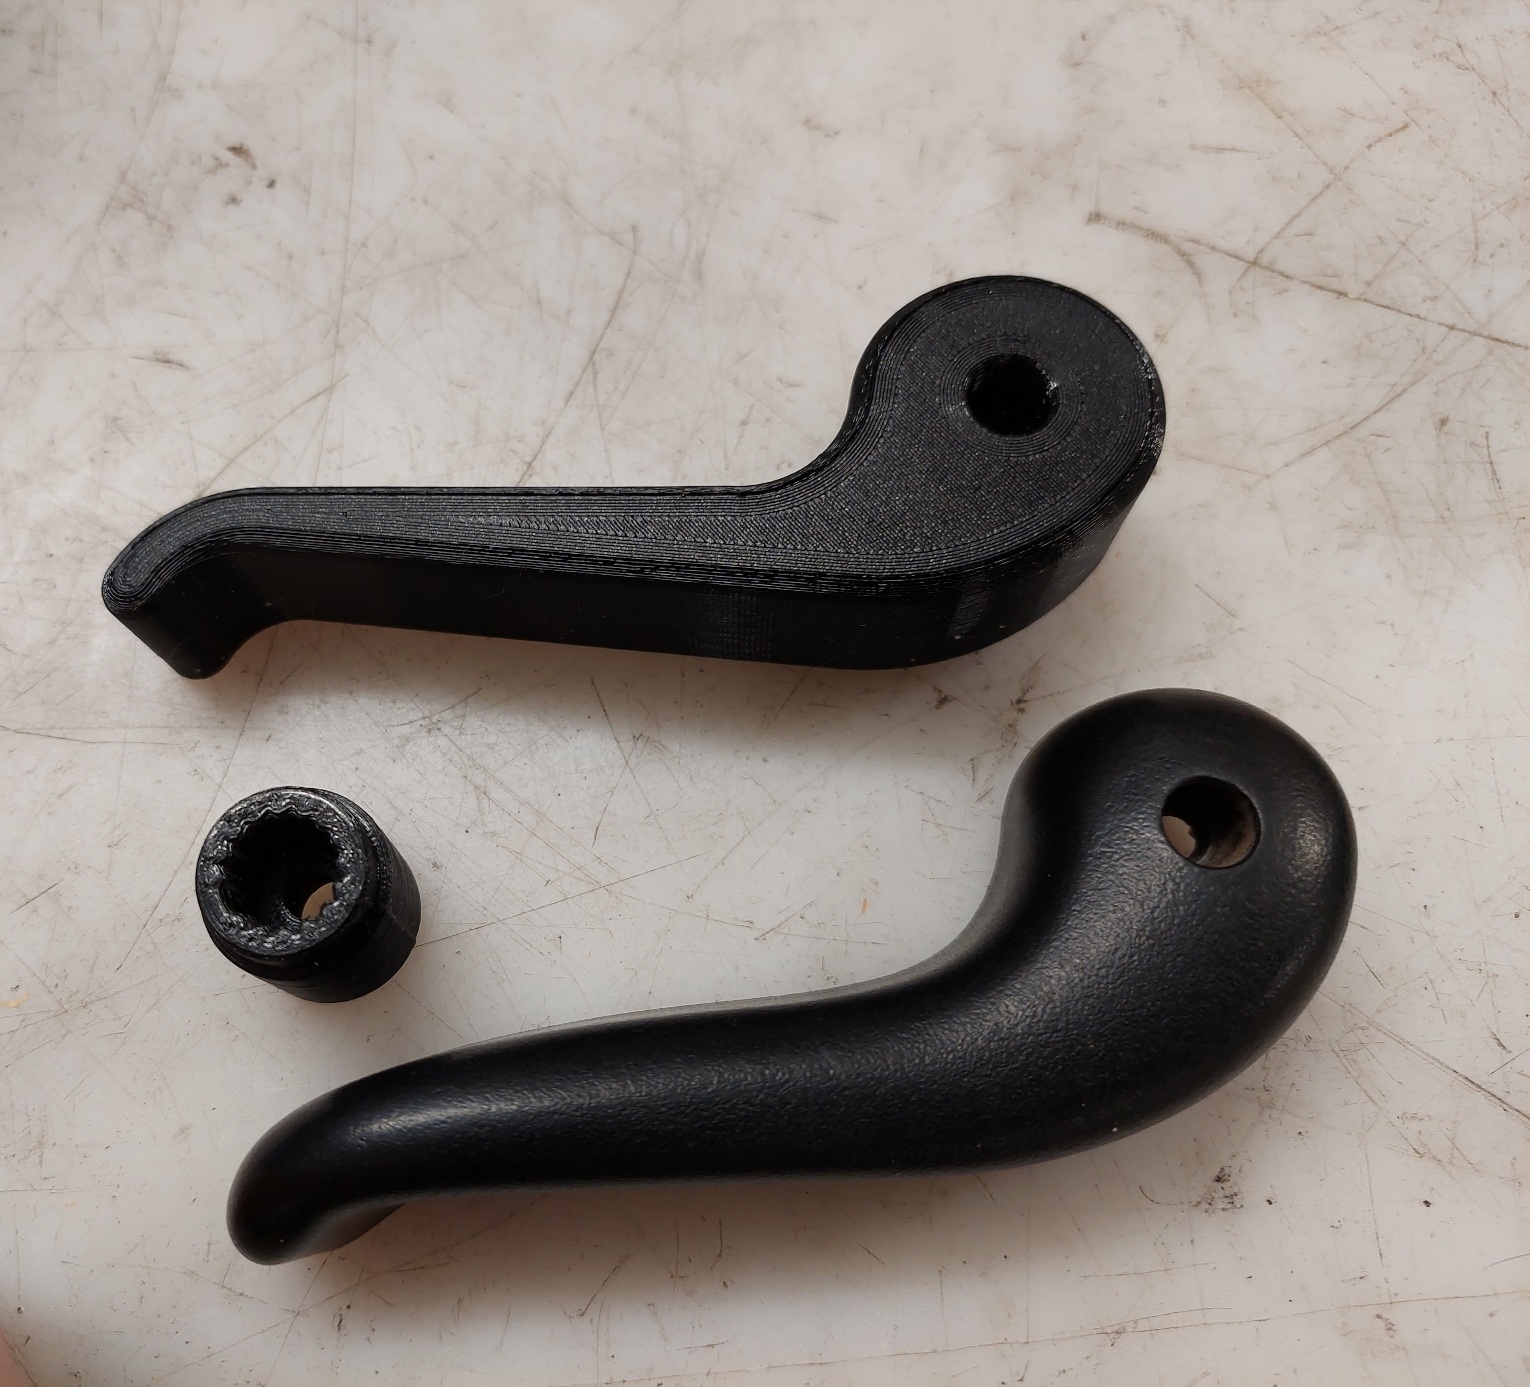 Dodge Ram (2nd gen) seat recline lever, may fit others.